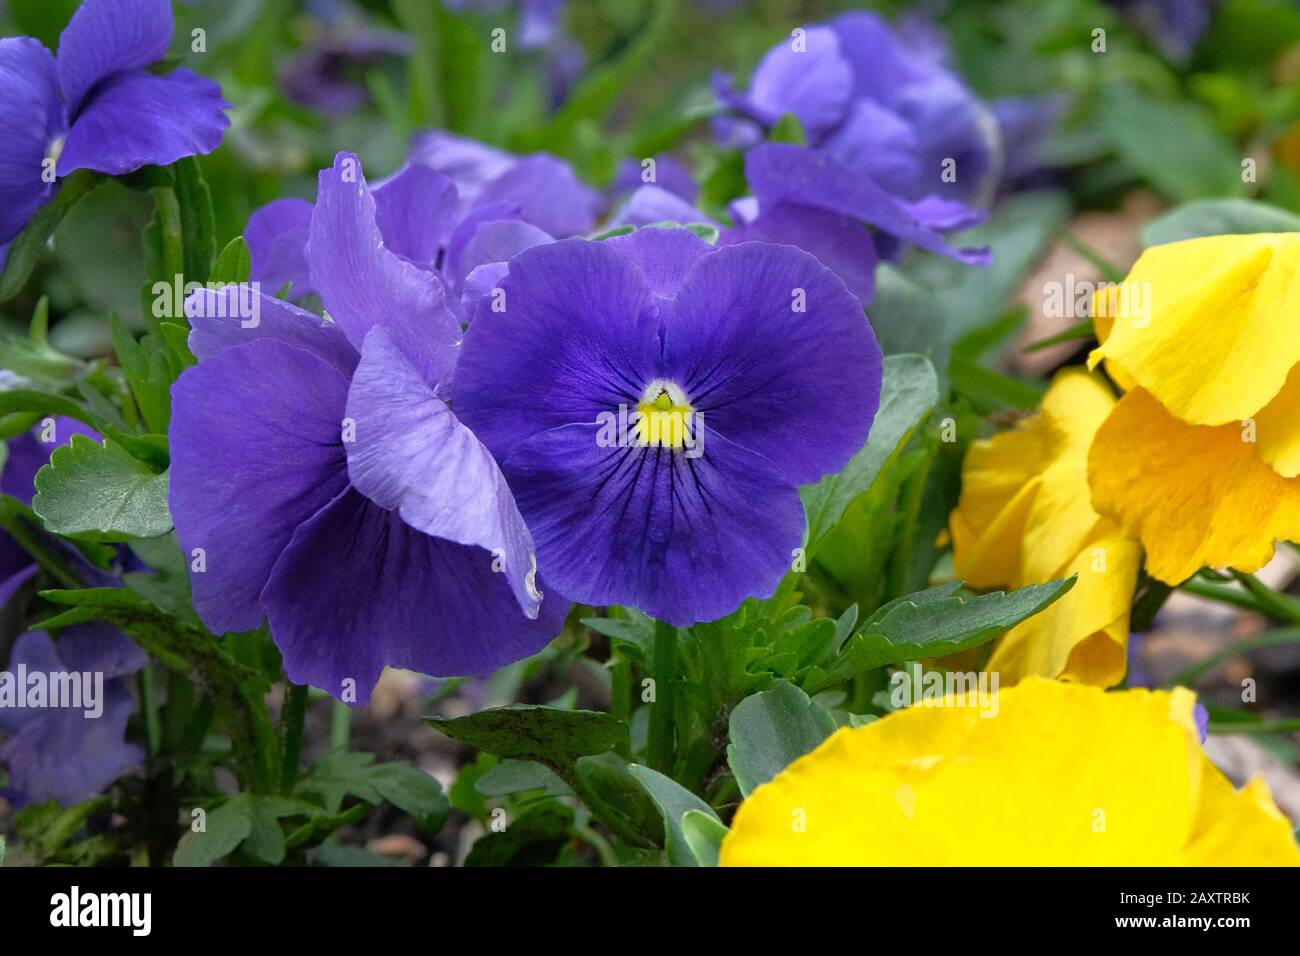 Pansies is blooming in meadow, closeup. Blue and yellow flowers is growing in garden. Landscaping and decoration in spring season. Stock Photo